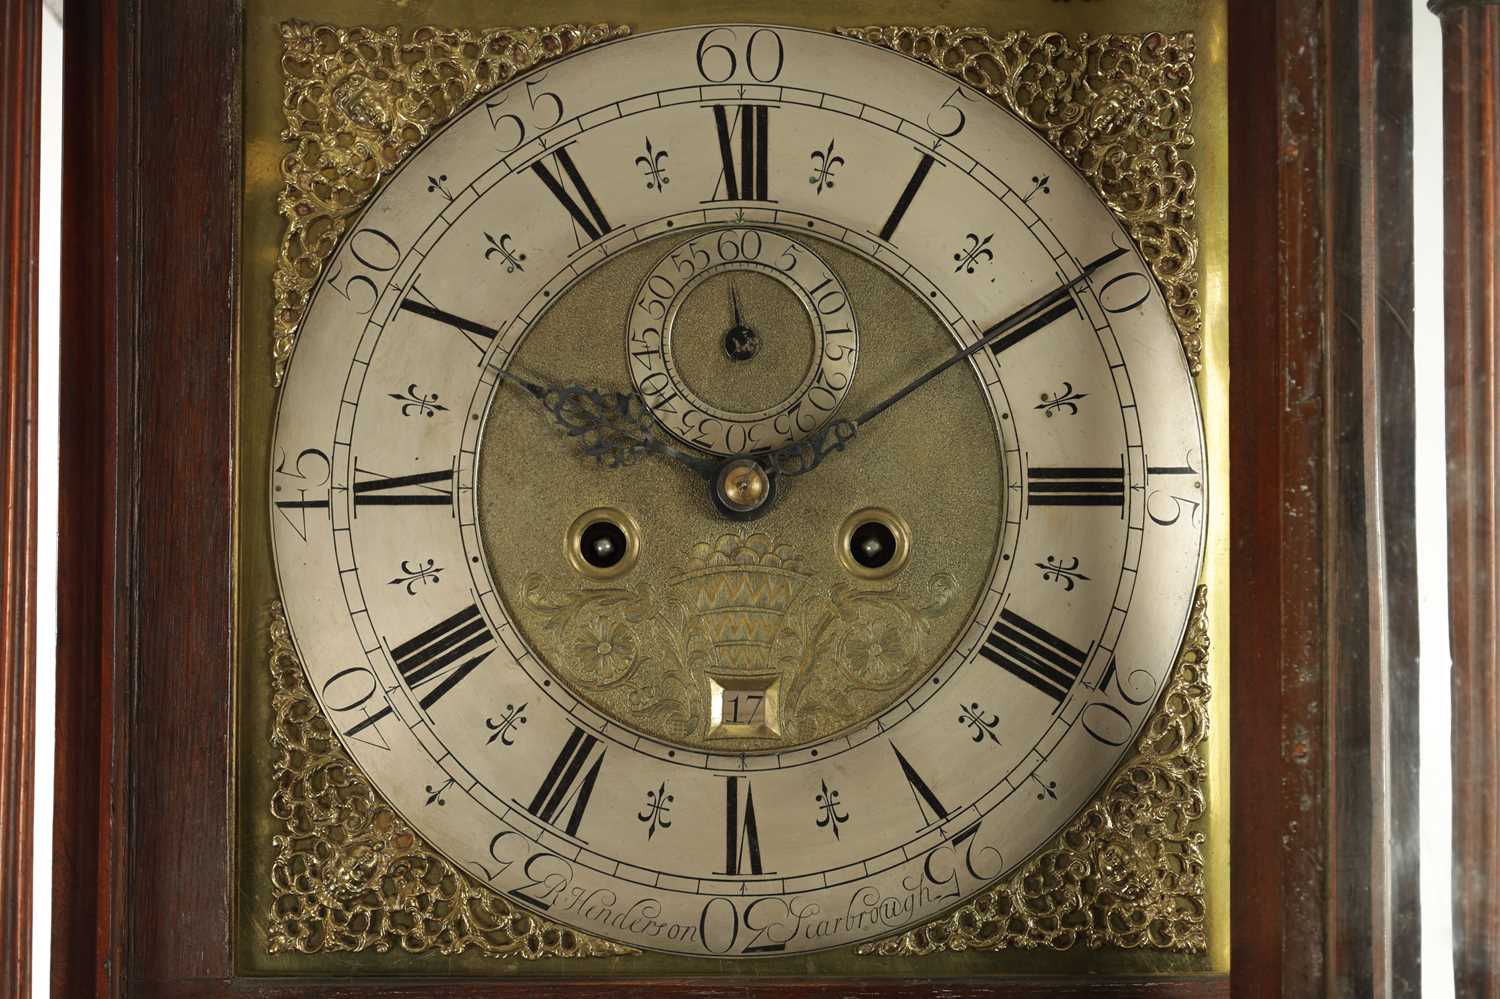 R. HENDERSON, SCARBROUGH. A MID 18TH CENTURY FIGURED MAHOGANY LONGCASE CLOCK - Image 5 of 8